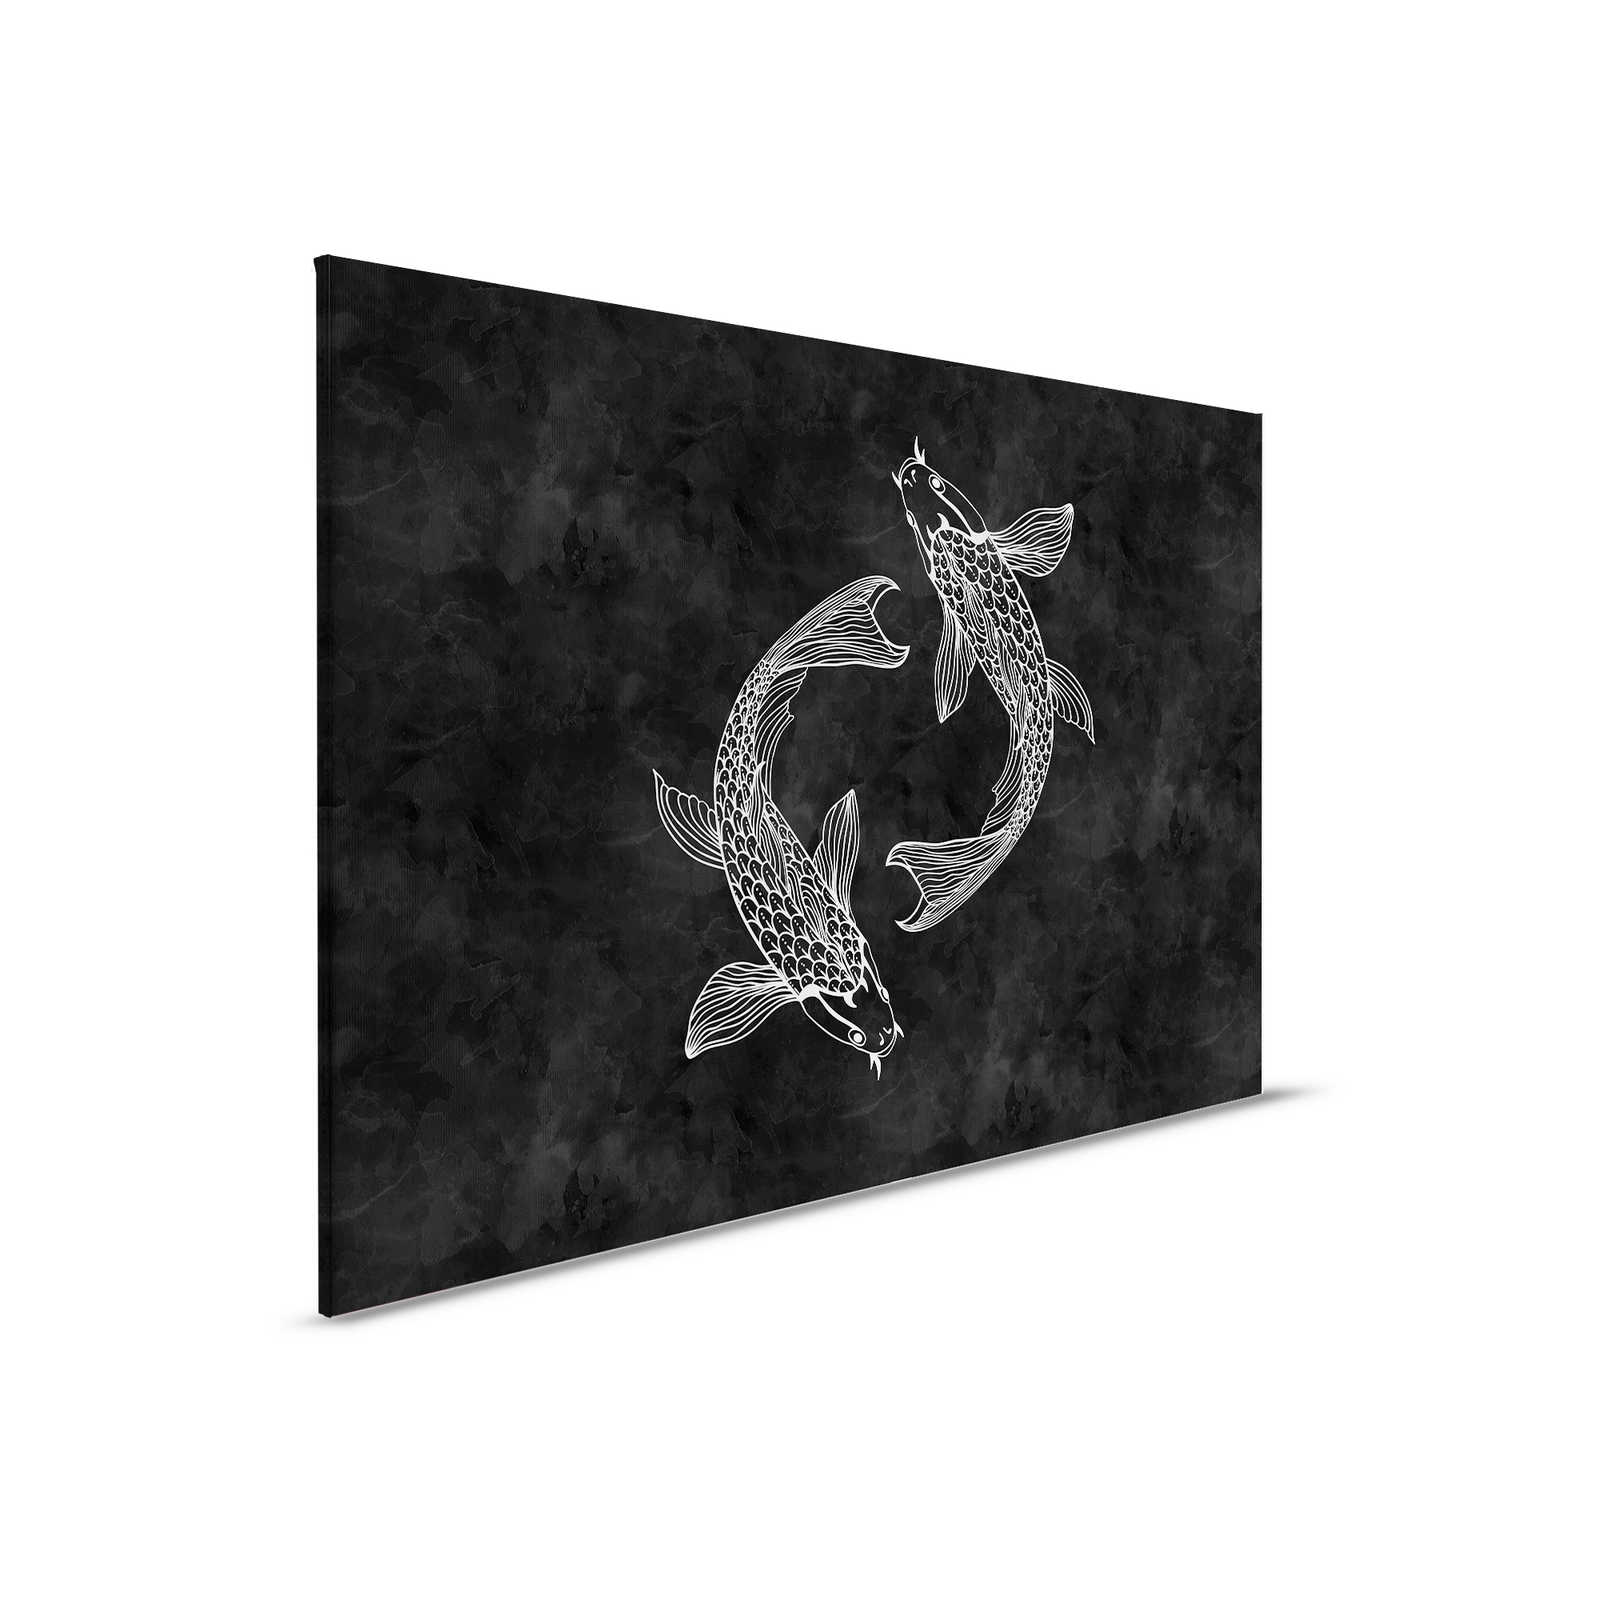 Koi Canvas Painting Black and White in Chalkboard Look - 0.90 m x 0.60 m
